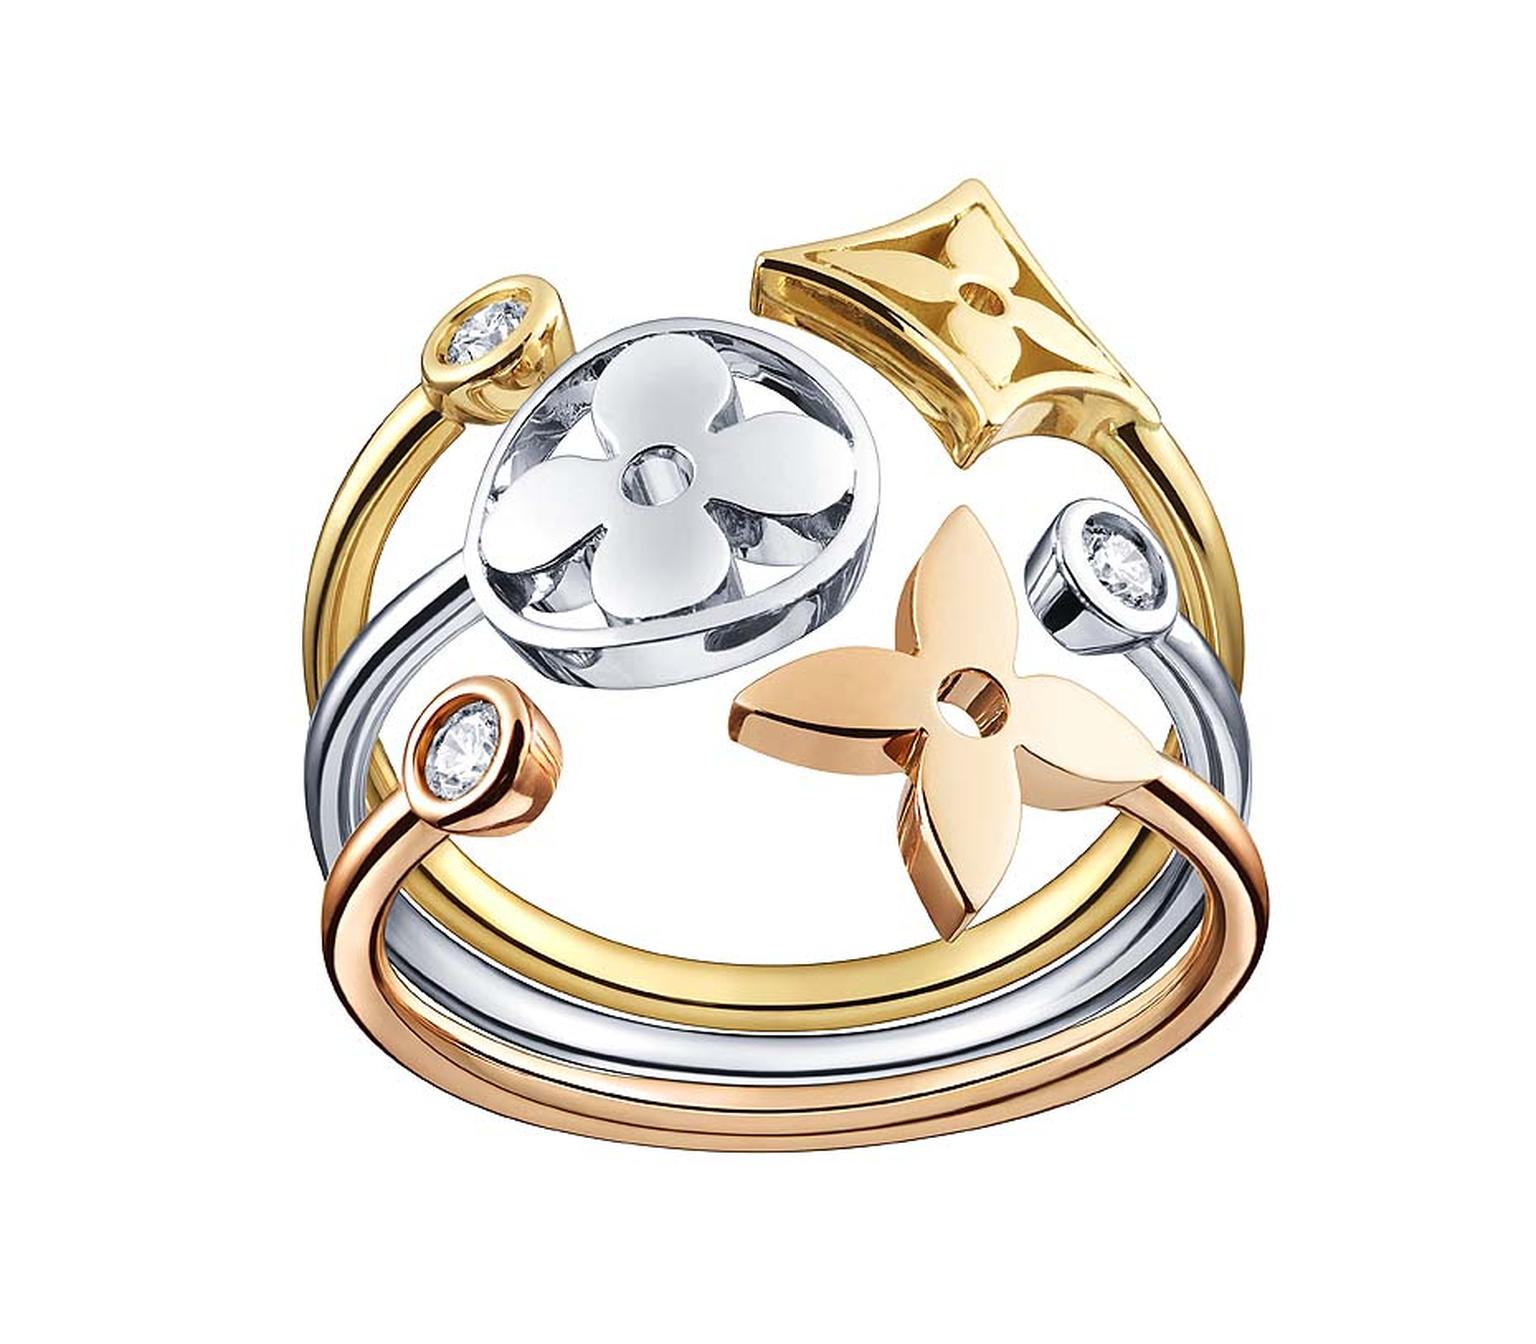 Louis Vuitton jewellery: new Monogram Idylle collection is the most